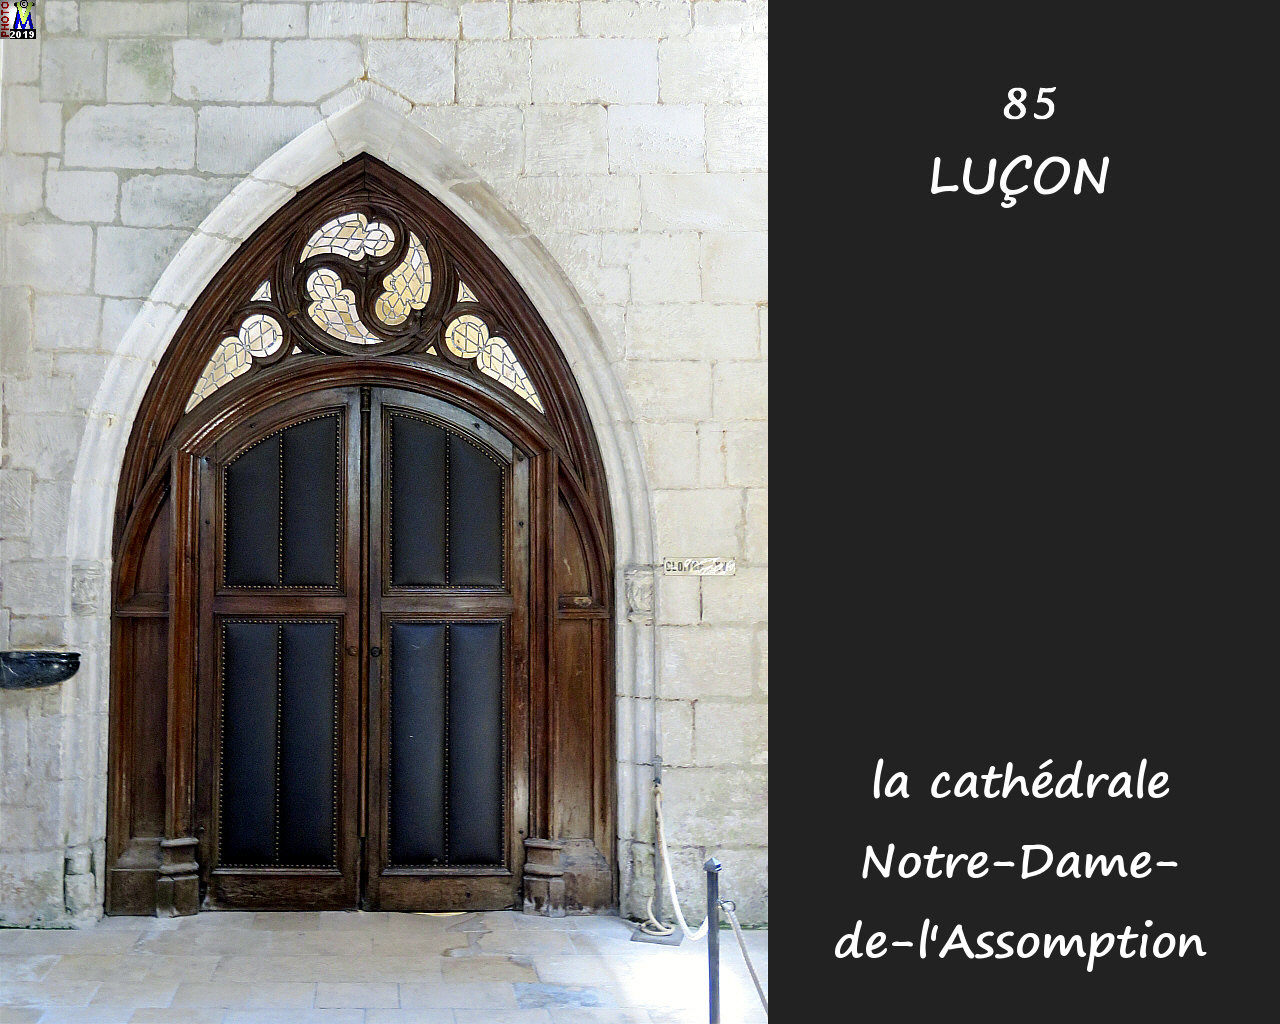 85LUCON_cathedrale_280.jpg